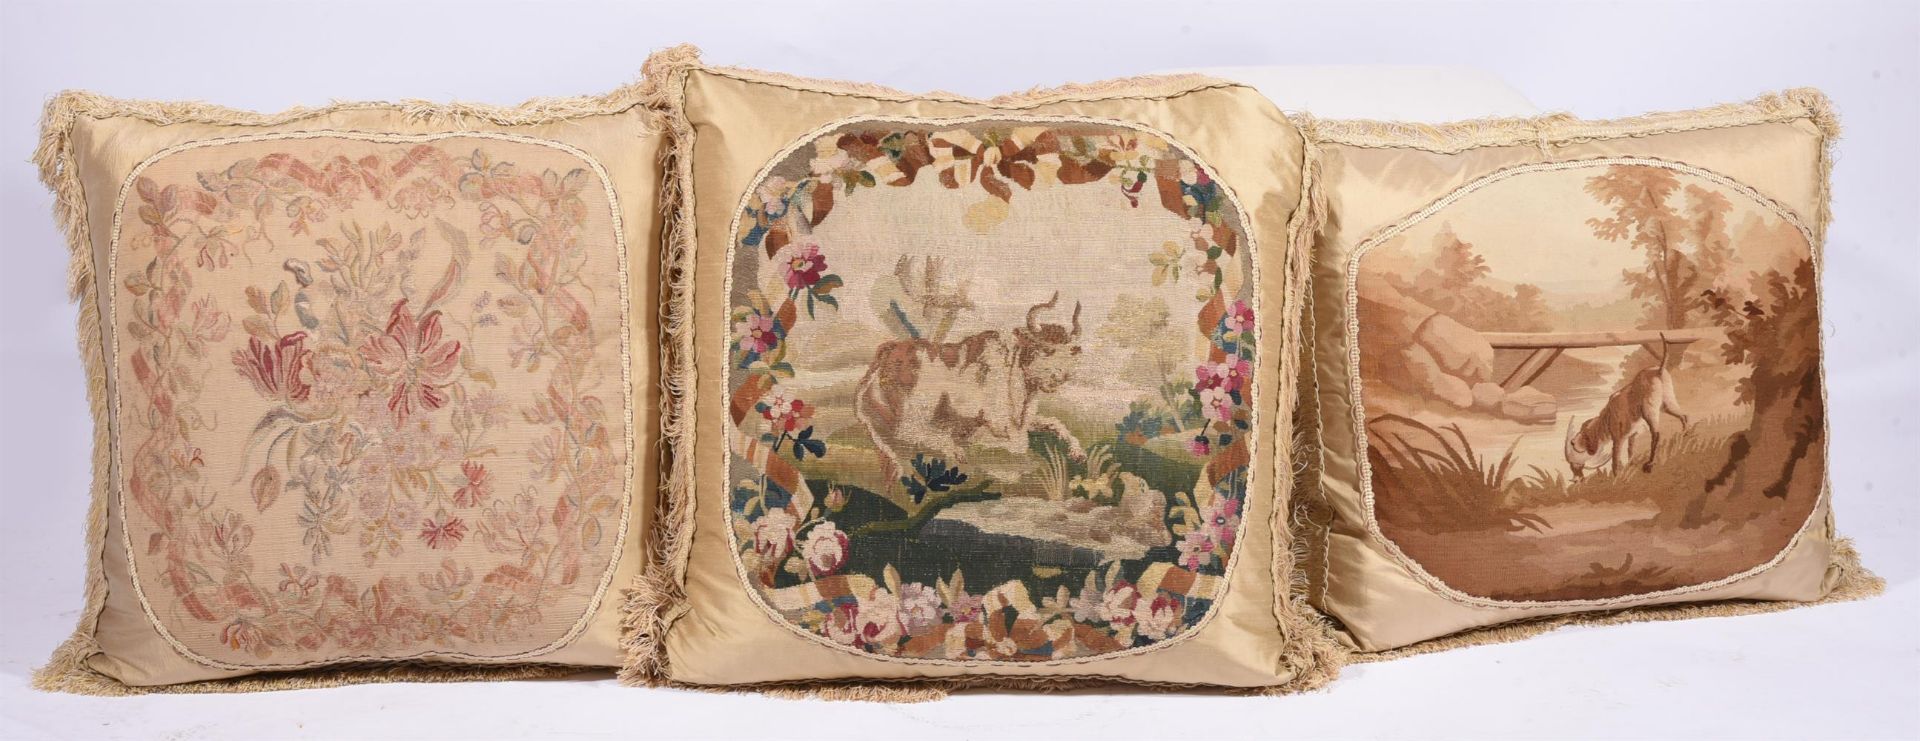 SIX LARGE CUSHIONS INCORPORATING 18TH CENTURY TAPESTRY AND LATER FABRIC - Image 3 of 4